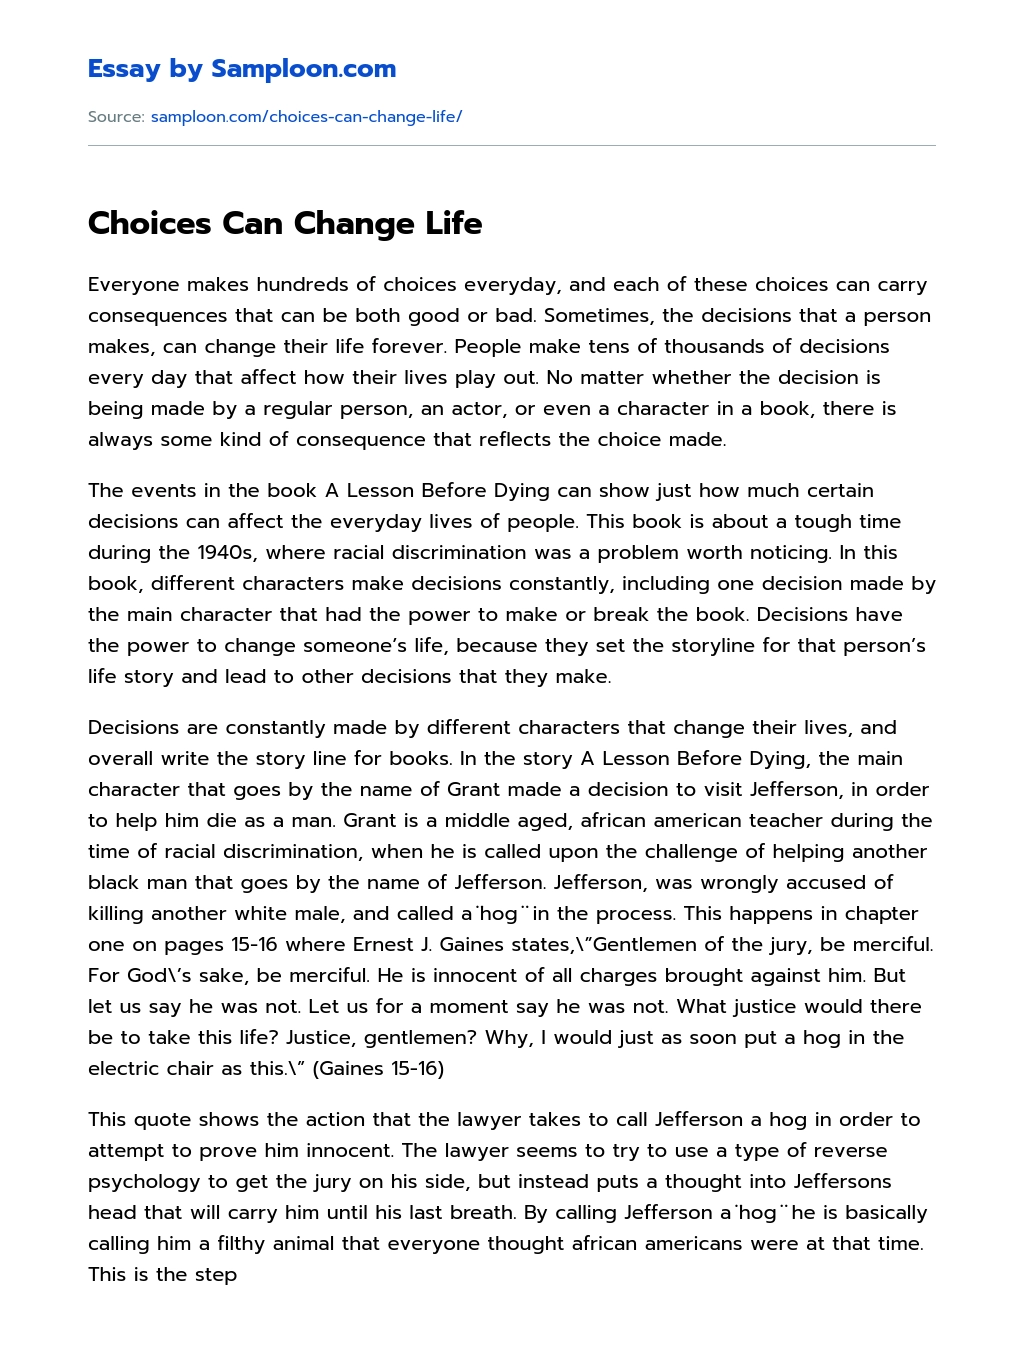 Choices Can Change Life Expository essay